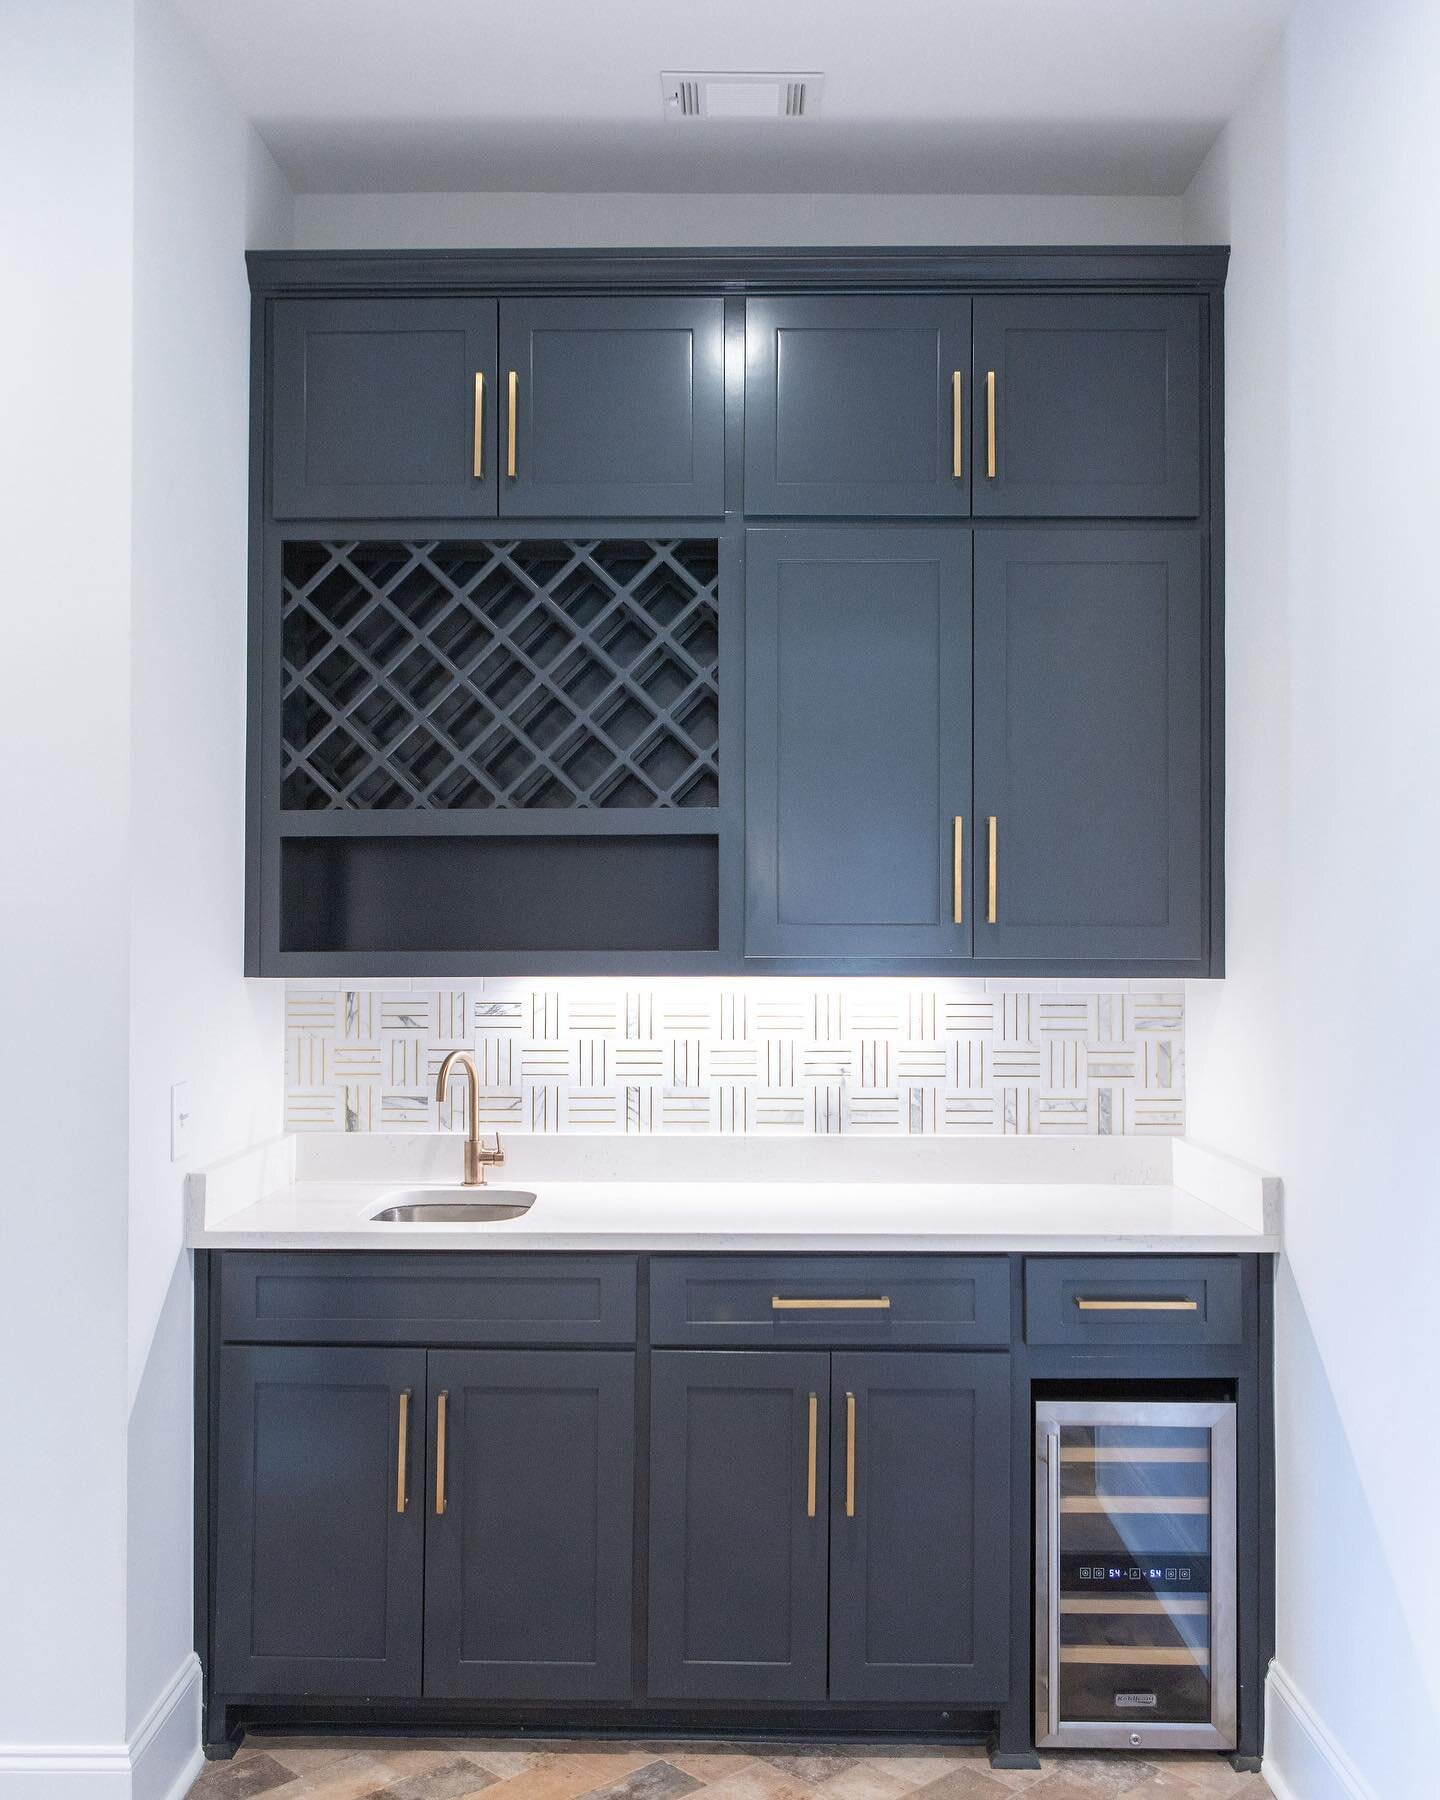 We can&rsquo;t get over this custom butler&rsquo;s pantry design for one of our clients! #kellywatsondesigner #ryanwatsonbuilder #landmarkproperties
.
.
.
.
.
.
.
.
.
.
.
#butlerspantry #custombutlerspantry #butlerspantrydesign #customhomebuilders #r